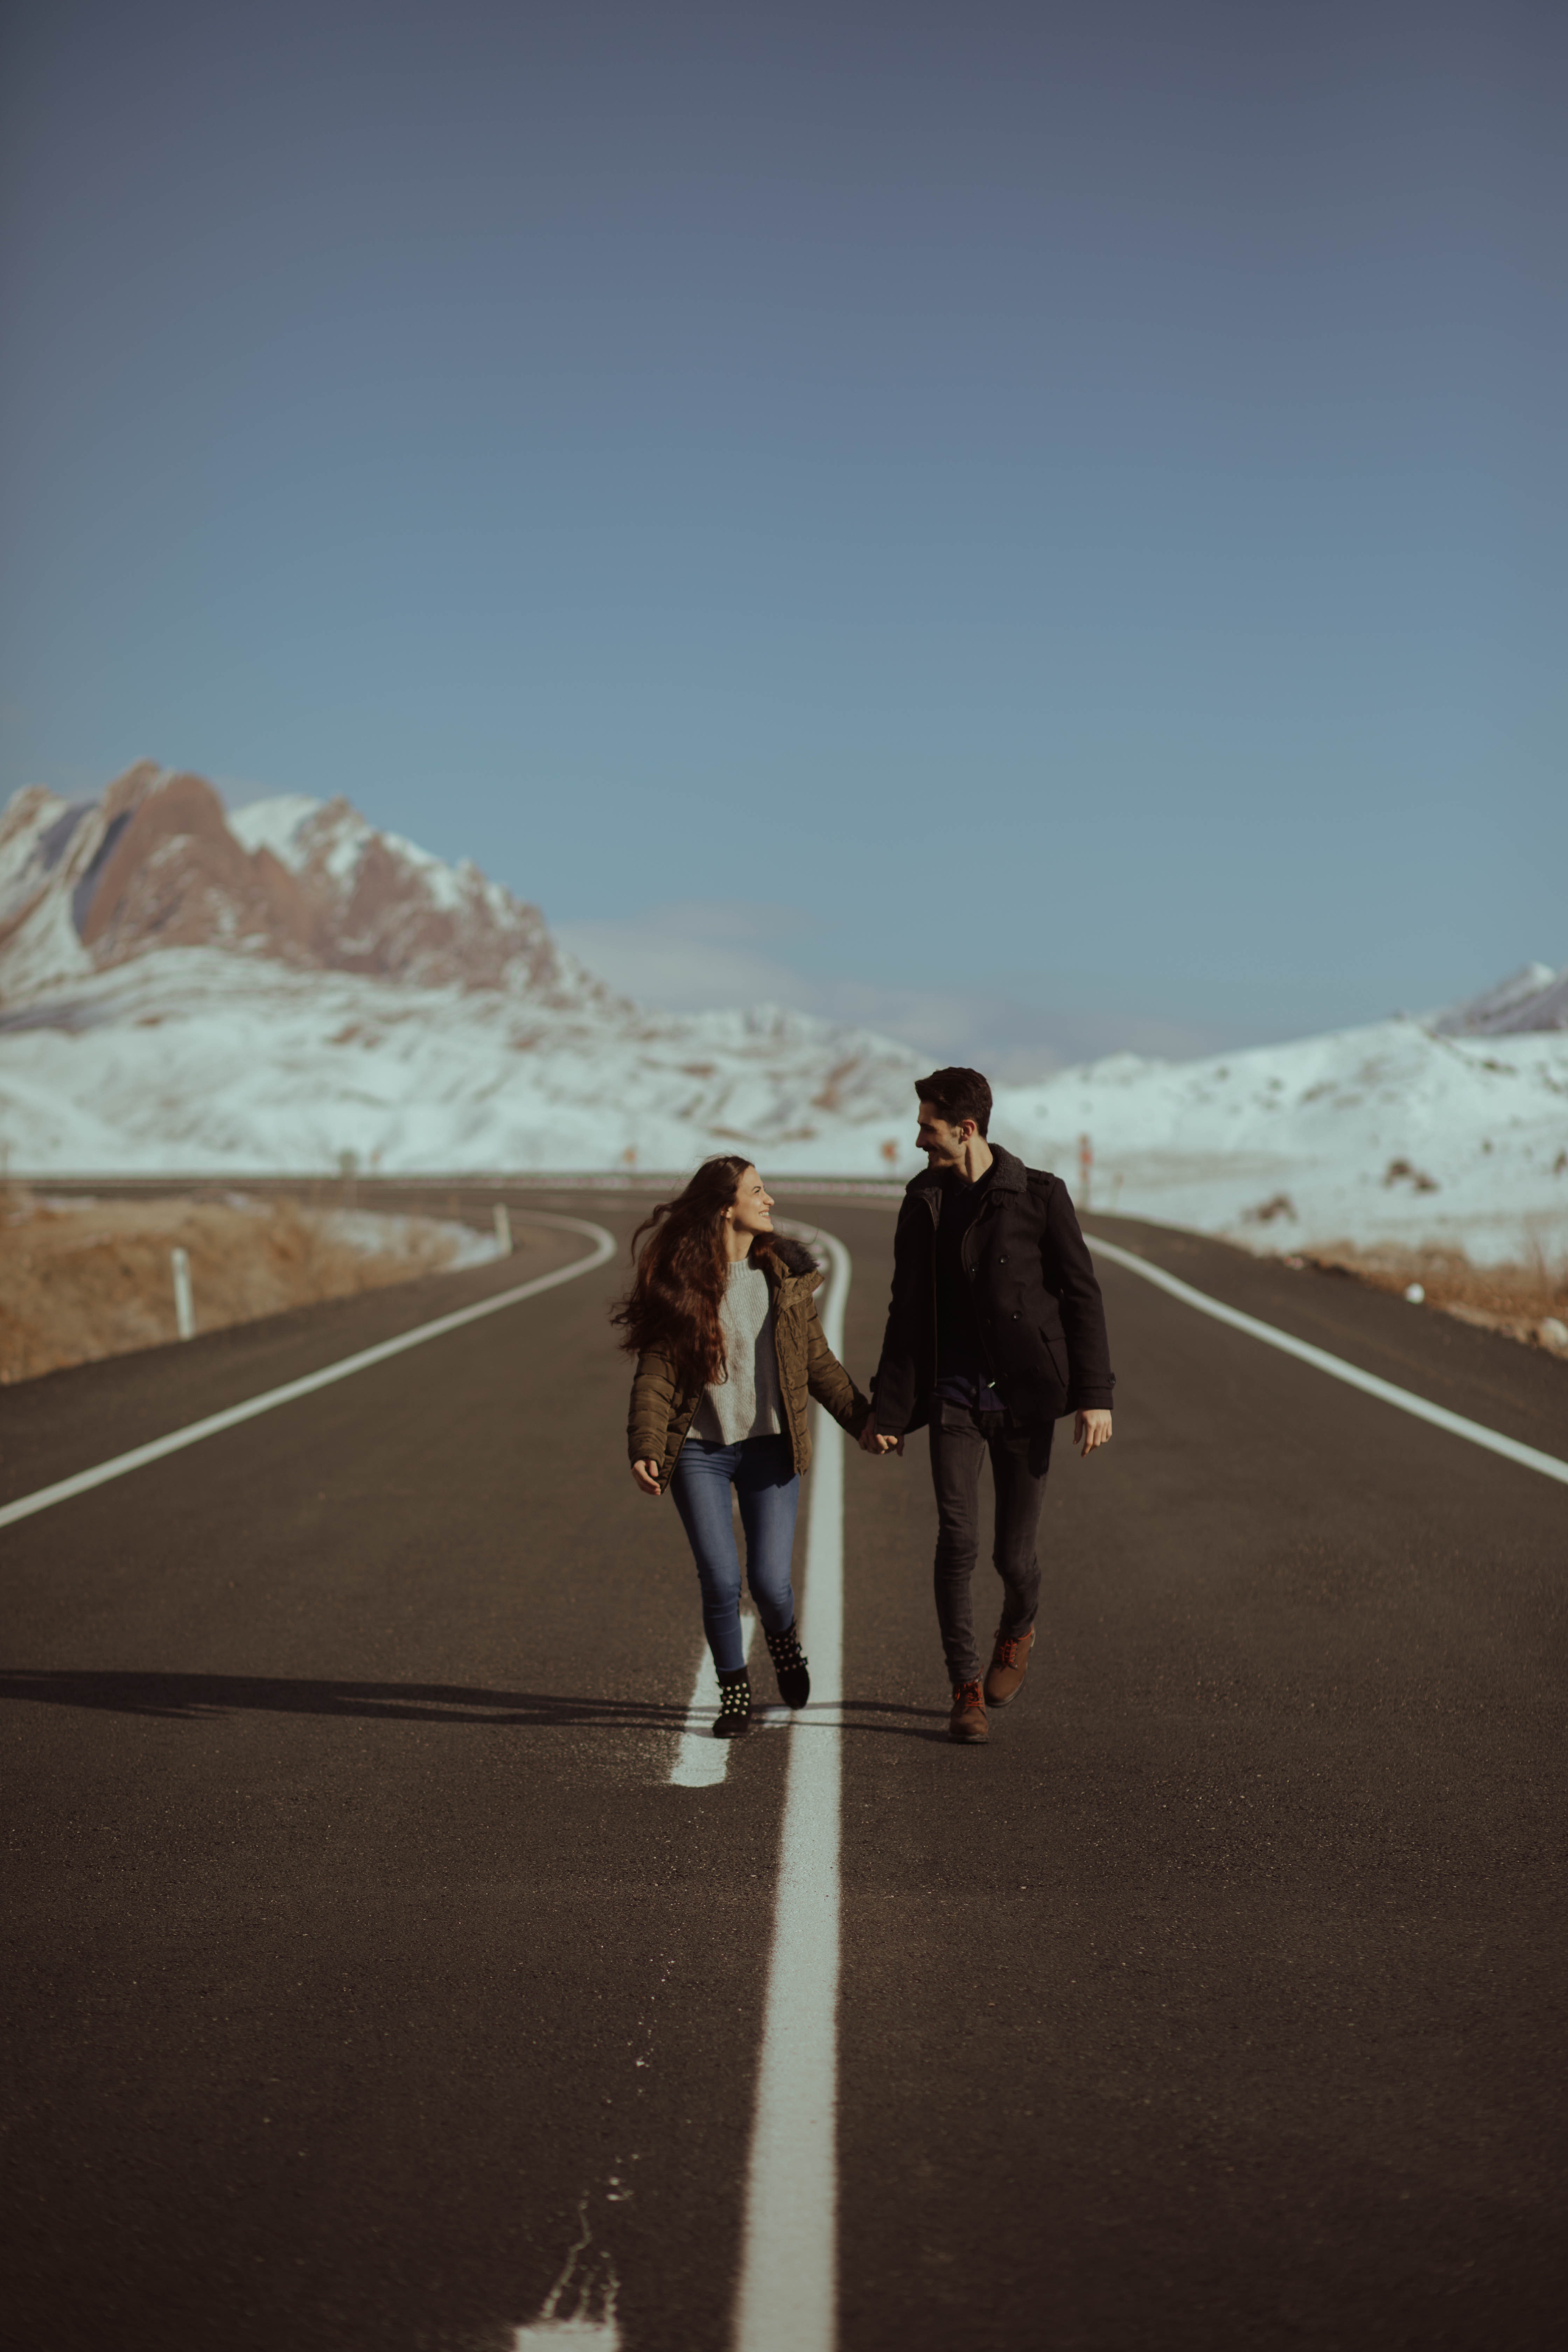 A couple walking in the middle of the road together. | Source: Pexels